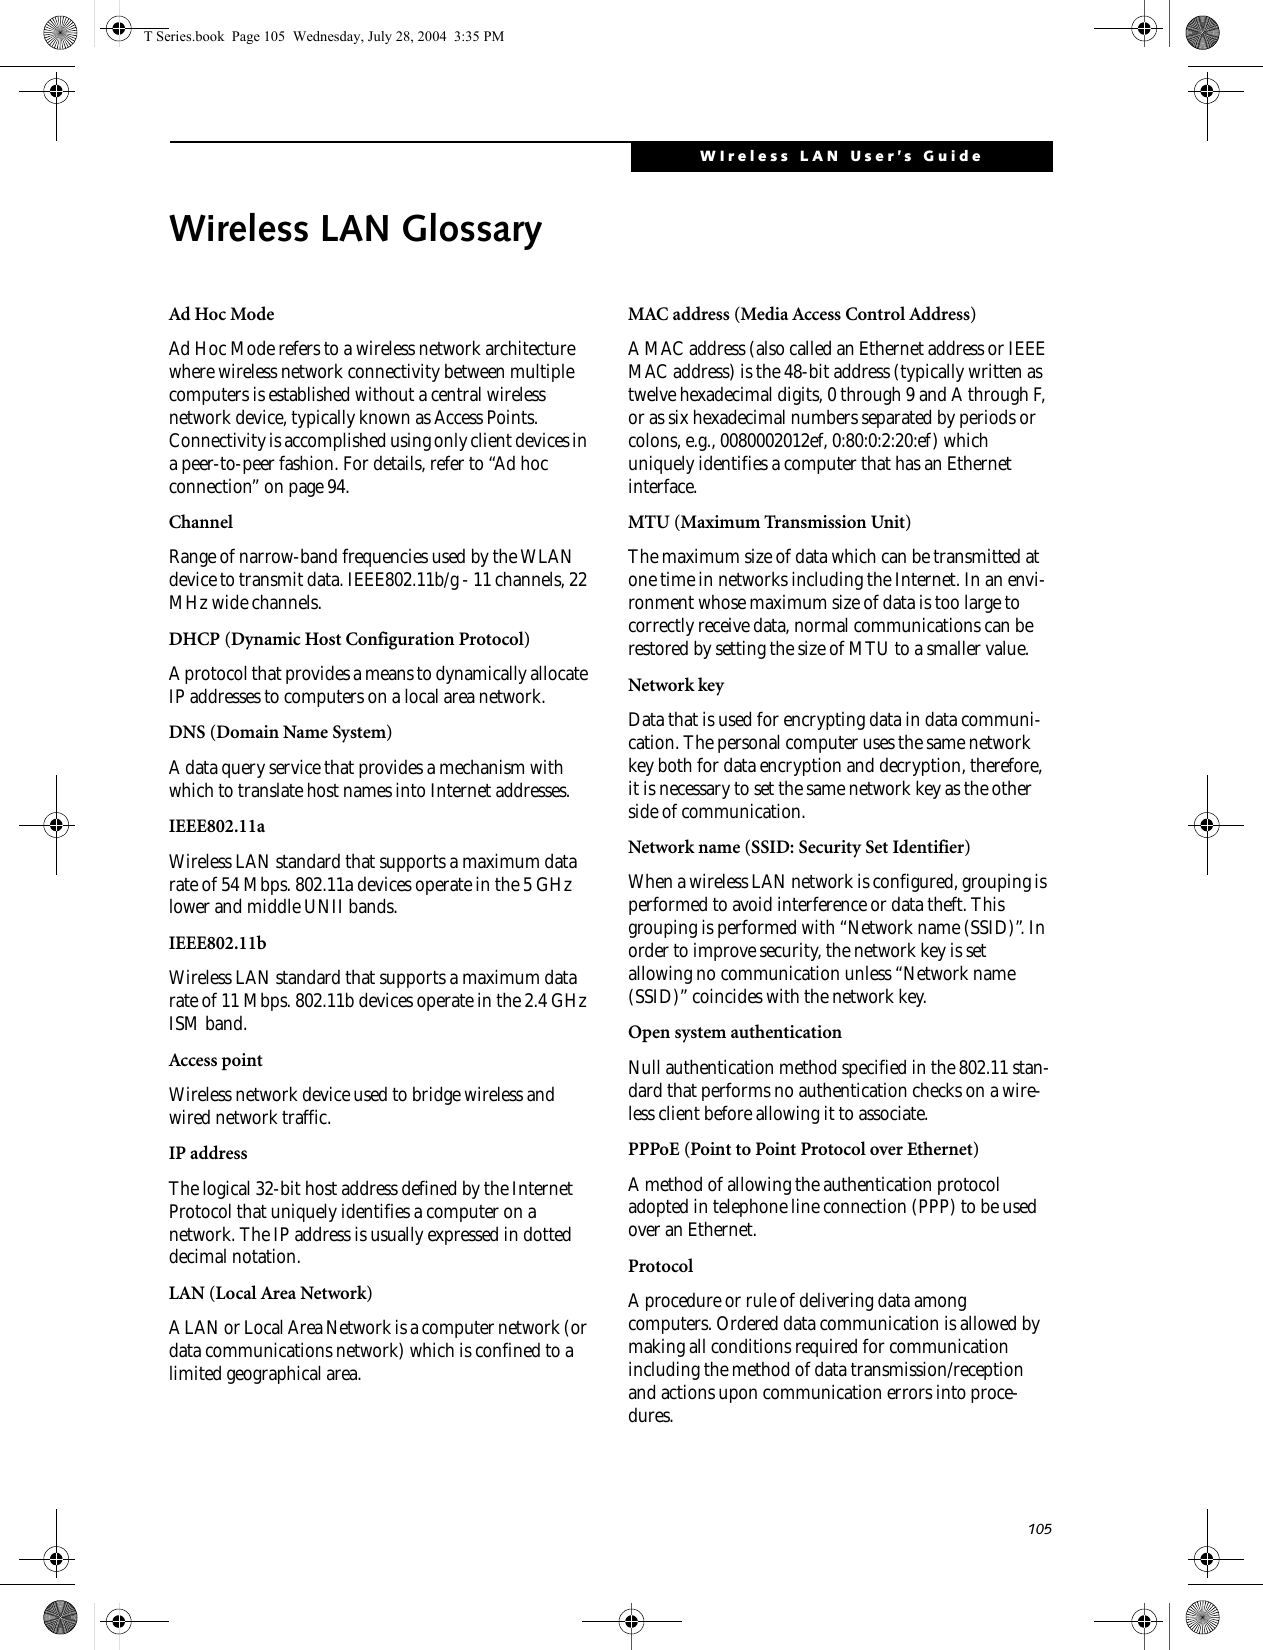 105WIreless LAN User’s Guide Wireless LAN GlossaryAd Hoc ModeAd Hoc Mode refers to a wireless network architecture where wireless network connectivity between multiple computers is established without a central wireless network device, typically known as Access Points. Connectivity is accomplished using only client devices in a peer-to-peer fashion. For details, refer to “Ad hoc connection” on page 94.ChannelRange of narrow-band frequencies used by the WLAN device to transmit data. IEEE802.11b/g - 11 channels, 22 MHz wide channels.DHCP (Dynamic Host Configuration Protocol)A protocol that provides a means to dynamically allocate IP addresses to computers on a local area network.DNS (Domain Name System)A data query service that provides a mechanism with which to translate host names into Internet addresses.IEEE802.11aWireless LAN standard that supports a maximum data rate of 54 Mbps. 802.11a devices operate in the 5 GHz lower and middle UNII bands. IEEE802.11bWireless LAN standard that supports a maximum data rate of 11 Mbps. 802.11b devices operate in the 2.4 GHz ISM band. Access pointWireless network device used to bridge wireless and wired network traffic. IP addressThe logical 32-bit host address defined by the Internet Protocol that uniquely identifies a computer on a network. The IP address is usually expressed in dotted decimal notation.LAN (Local Area Network)A LAN or Local Area Network is a computer network (or data communications network) which is confined to a limited geographical area.MAC address (Media Access Control Address)A MAC address (also called an Ethernet address or IEEE MAC address) is the 48-bit address (typically written as twelve hexadecimal digits, 0 through 9 and A through F, or as six hexadecimal numbers separated by periods or colons, e.g., 0080002012ef, 0:80:0:2:20:ef) which uniquely identifies a computer that has an Ethernet interface.MTU (Maximum Transmission Unit)The maximum size of data which can be transmitted at one time in networks including the Internet. In an envi-ronment whose maximum size of data is too large to correctly receive data, normal communications can be restored by setting the size of MTU to a smaller value.Network keyData that is used for encrypting data in data communi-cation. The personal computer uses the same network key both for data encryption and decryption, therefore, it is necessary to set the same network key as the other side of communication.Network name (SSID: Security Set Identifier)When a wireless LAN network is configured, grouping is performed to avoid interference or data theft. This grouping is performed with “Network name (SSID)”. In order to improve security, the network key is set allowing no communication unless “Network name (SSID)” coincides with the network key.Open system authenticationNull authentication method specified in the 802.11 stan-dard that performs no authentication checks on a wire-less client before allowing it to associate.PPPoE (Point to Point Protocol over Ethernet)A method of allowing the authentication protocol adopted in telephone line connection (PPP) to be used over an Ethernet.ProtocolA procedure or rule of delivering data among computers. Ordered data communication is allowed by making all conditions required for communication including the method of data transmission/reception and actions upon communication errors into proce-dures.T Series.book  Page 105  Wednesday, July 28, 2004  3:35 PM